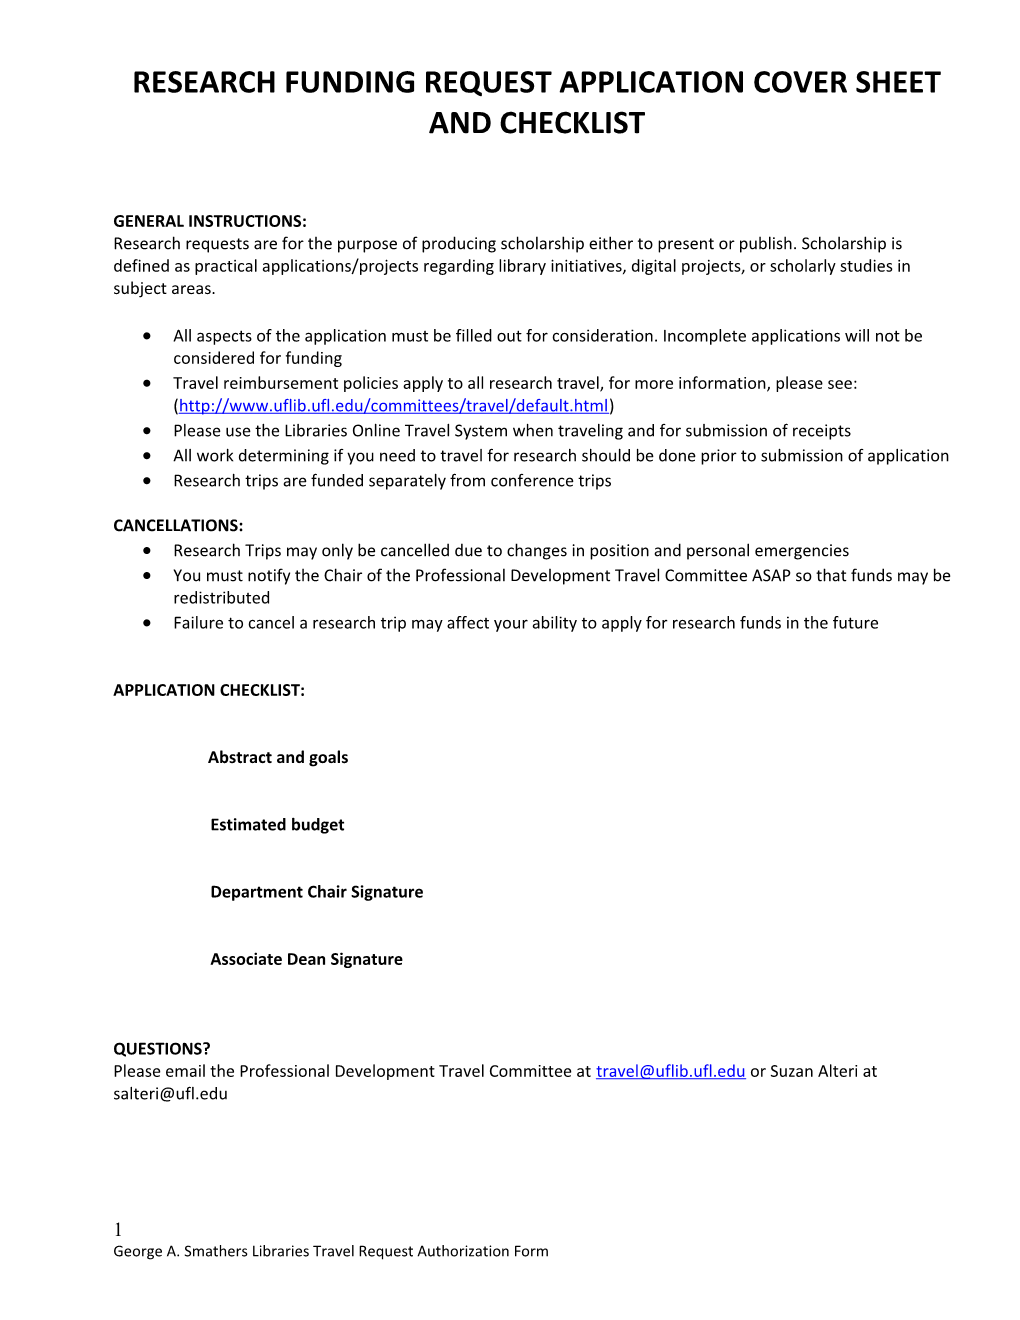 Research Funding Request Application Cover Sheet and Checklist